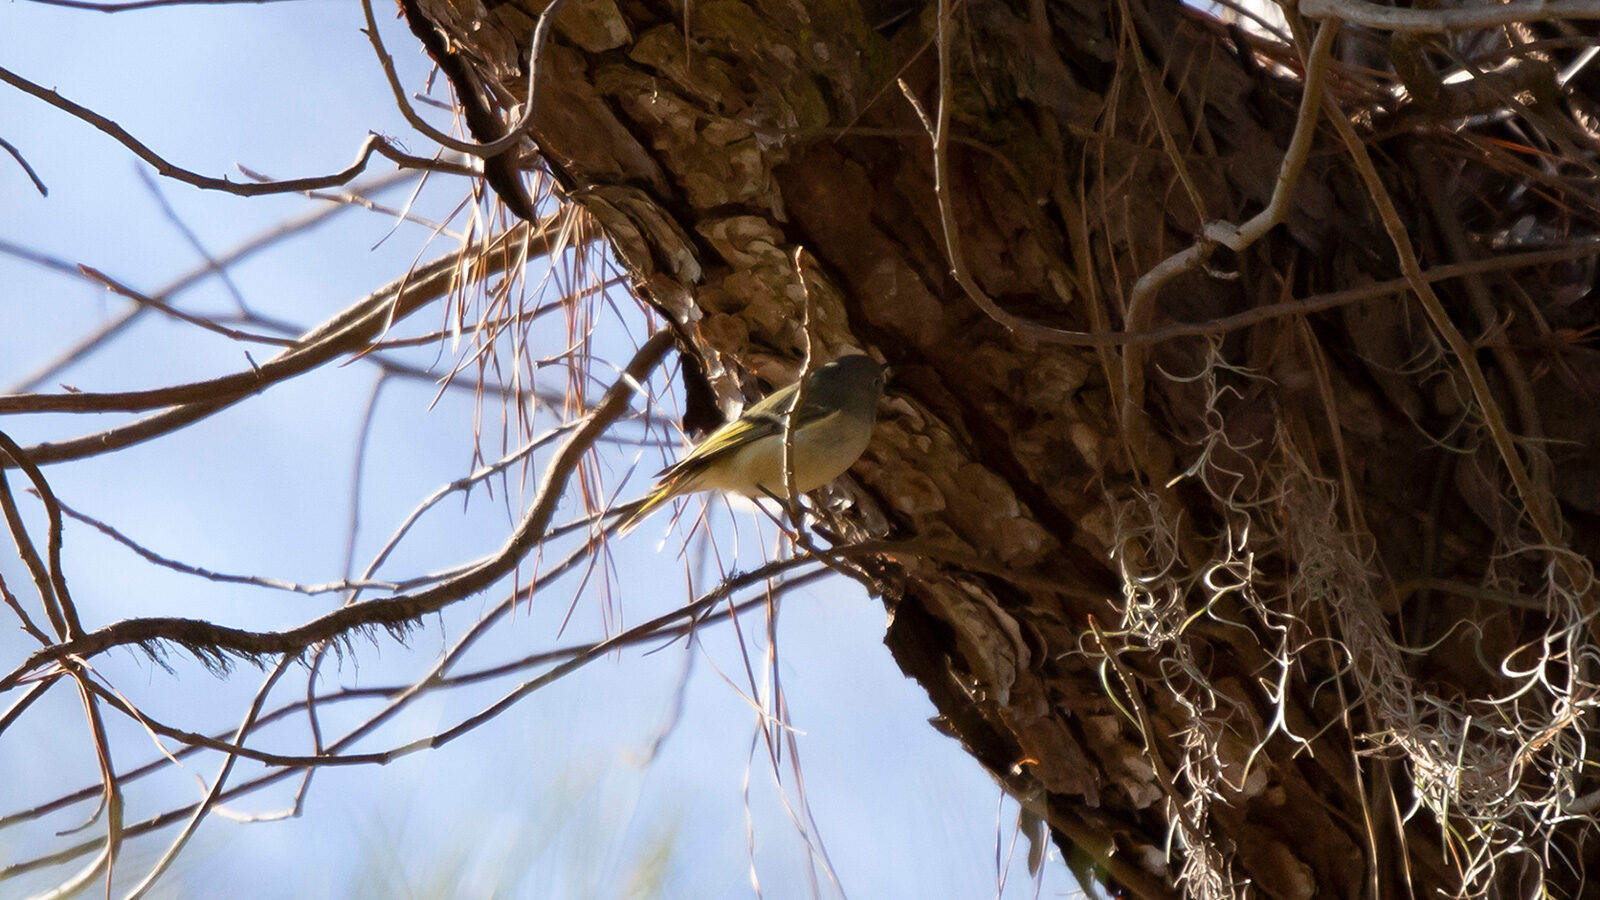 Ruby-crowned kinglet perched on a vine